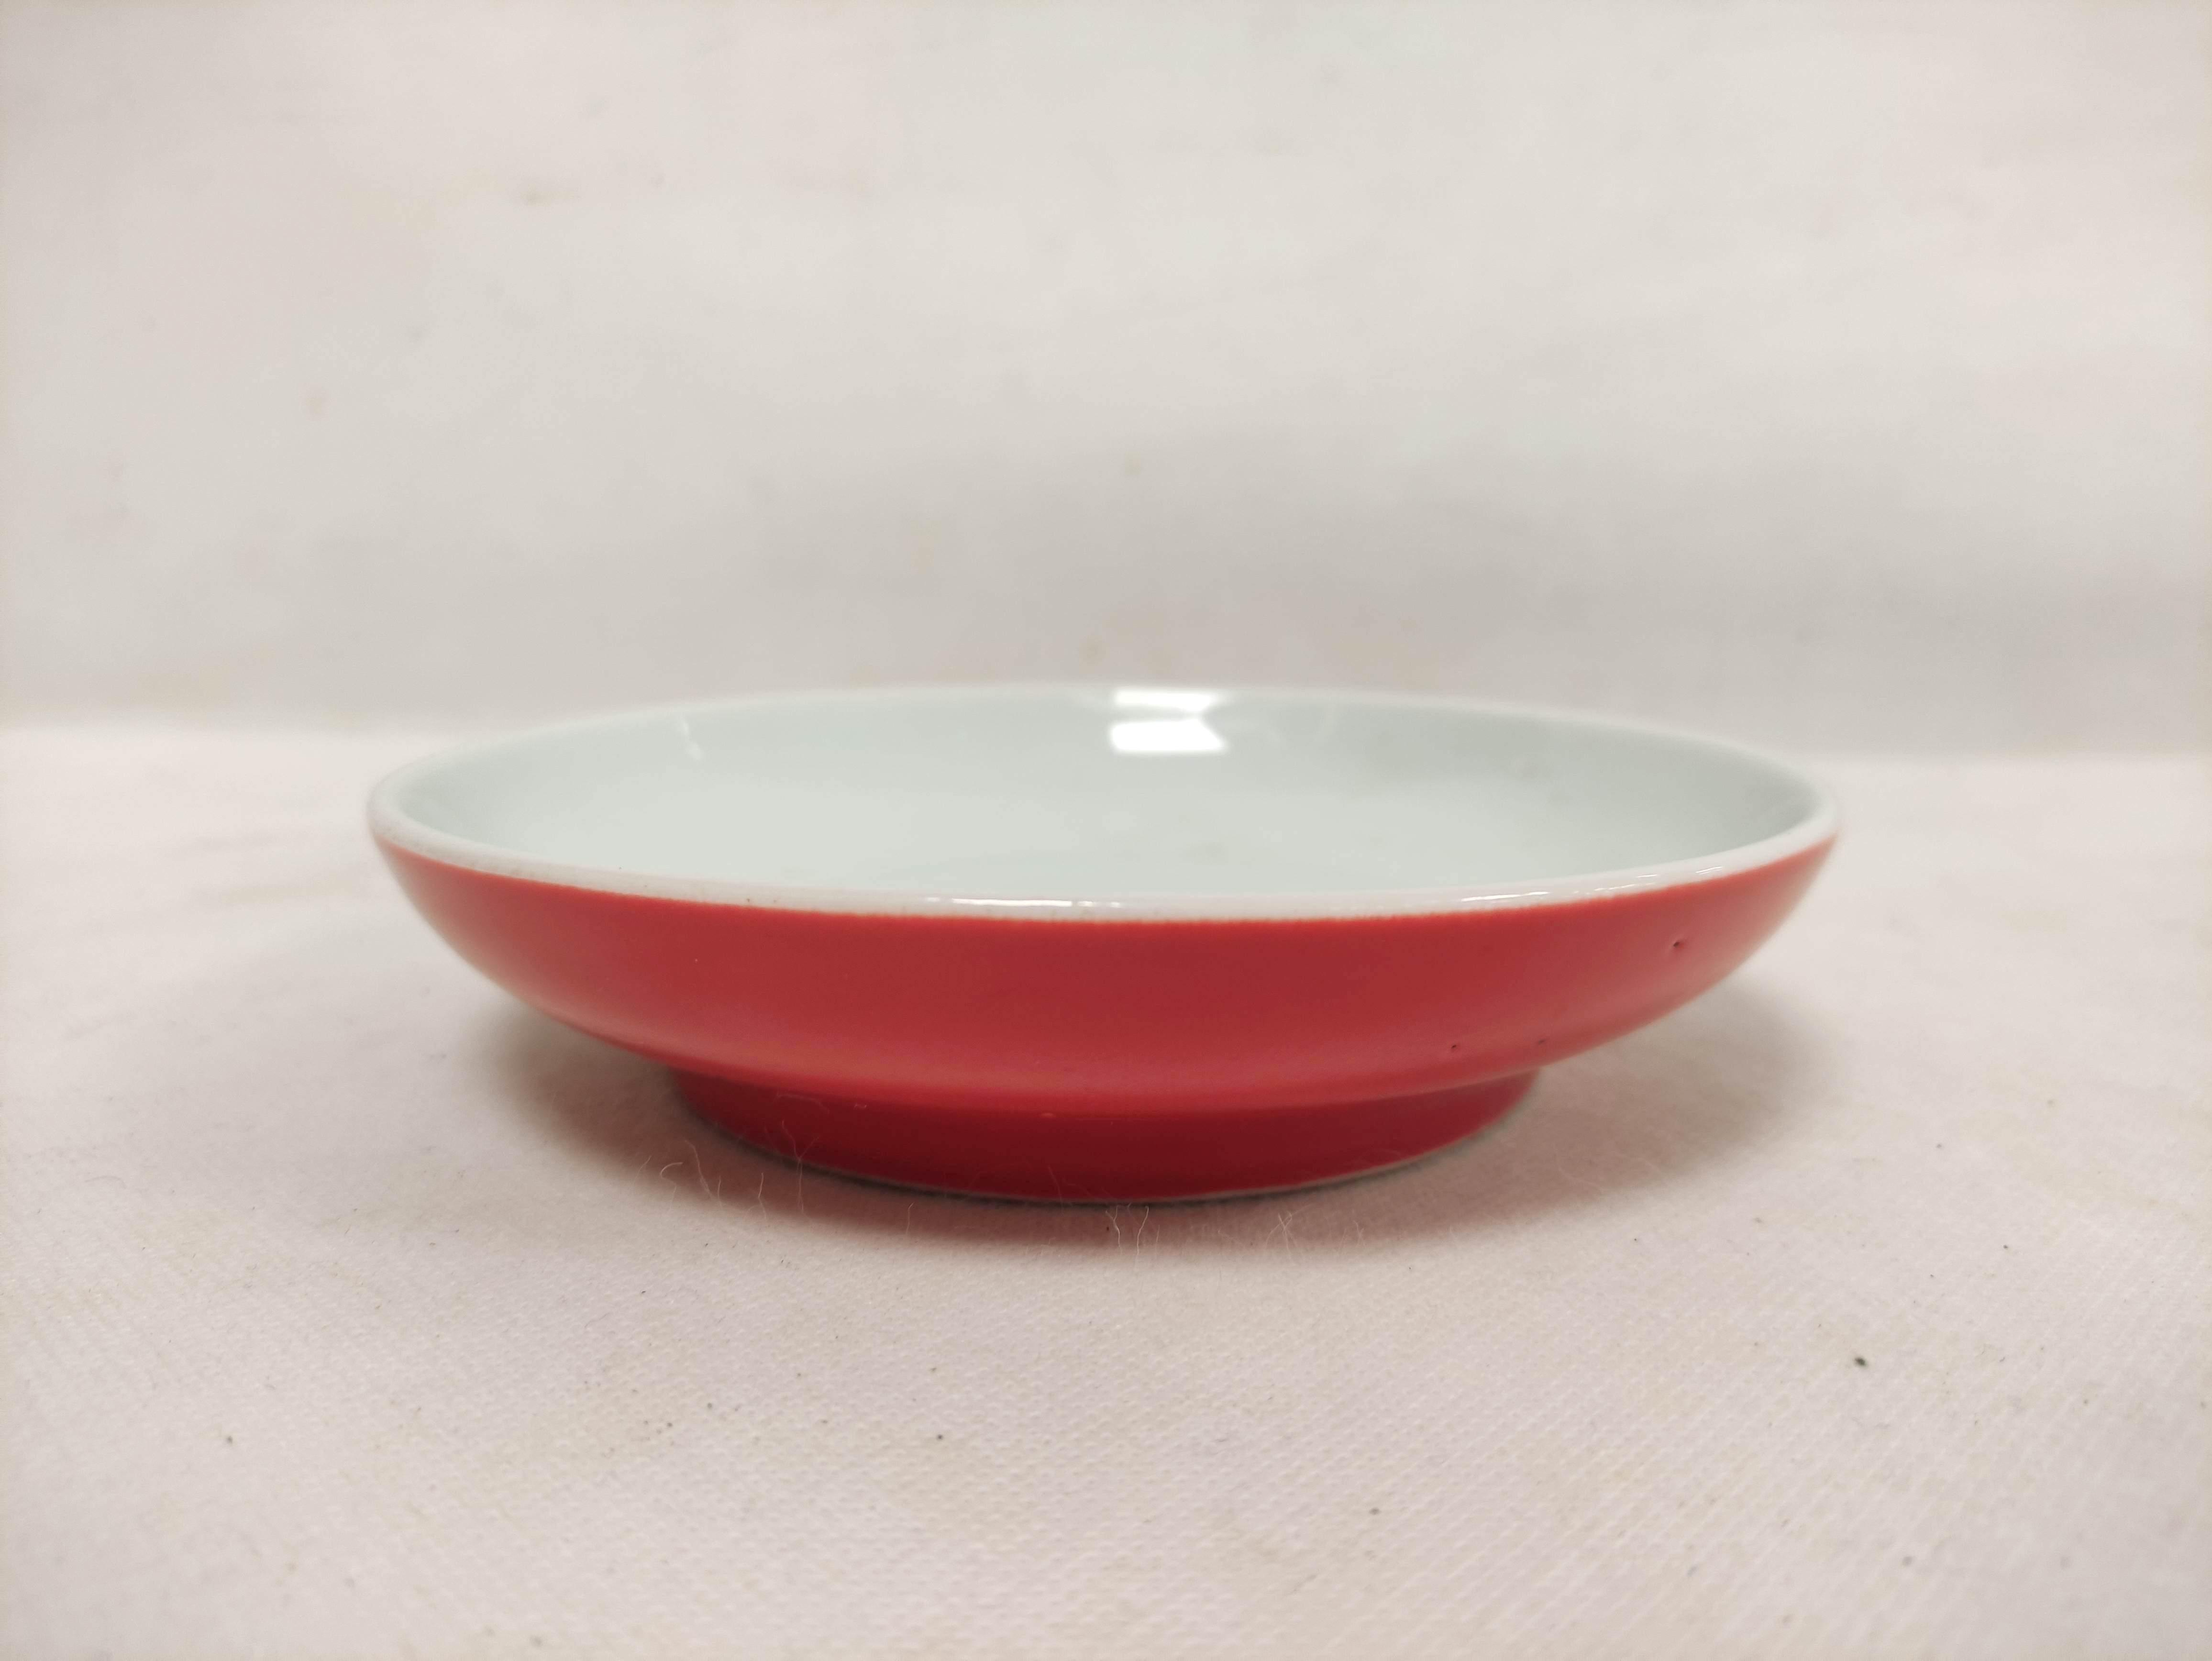 19th century Chinese grey porcelain crackle ware bowl and cover, 10cm high and a red glazed saucer - Image 6 of 8